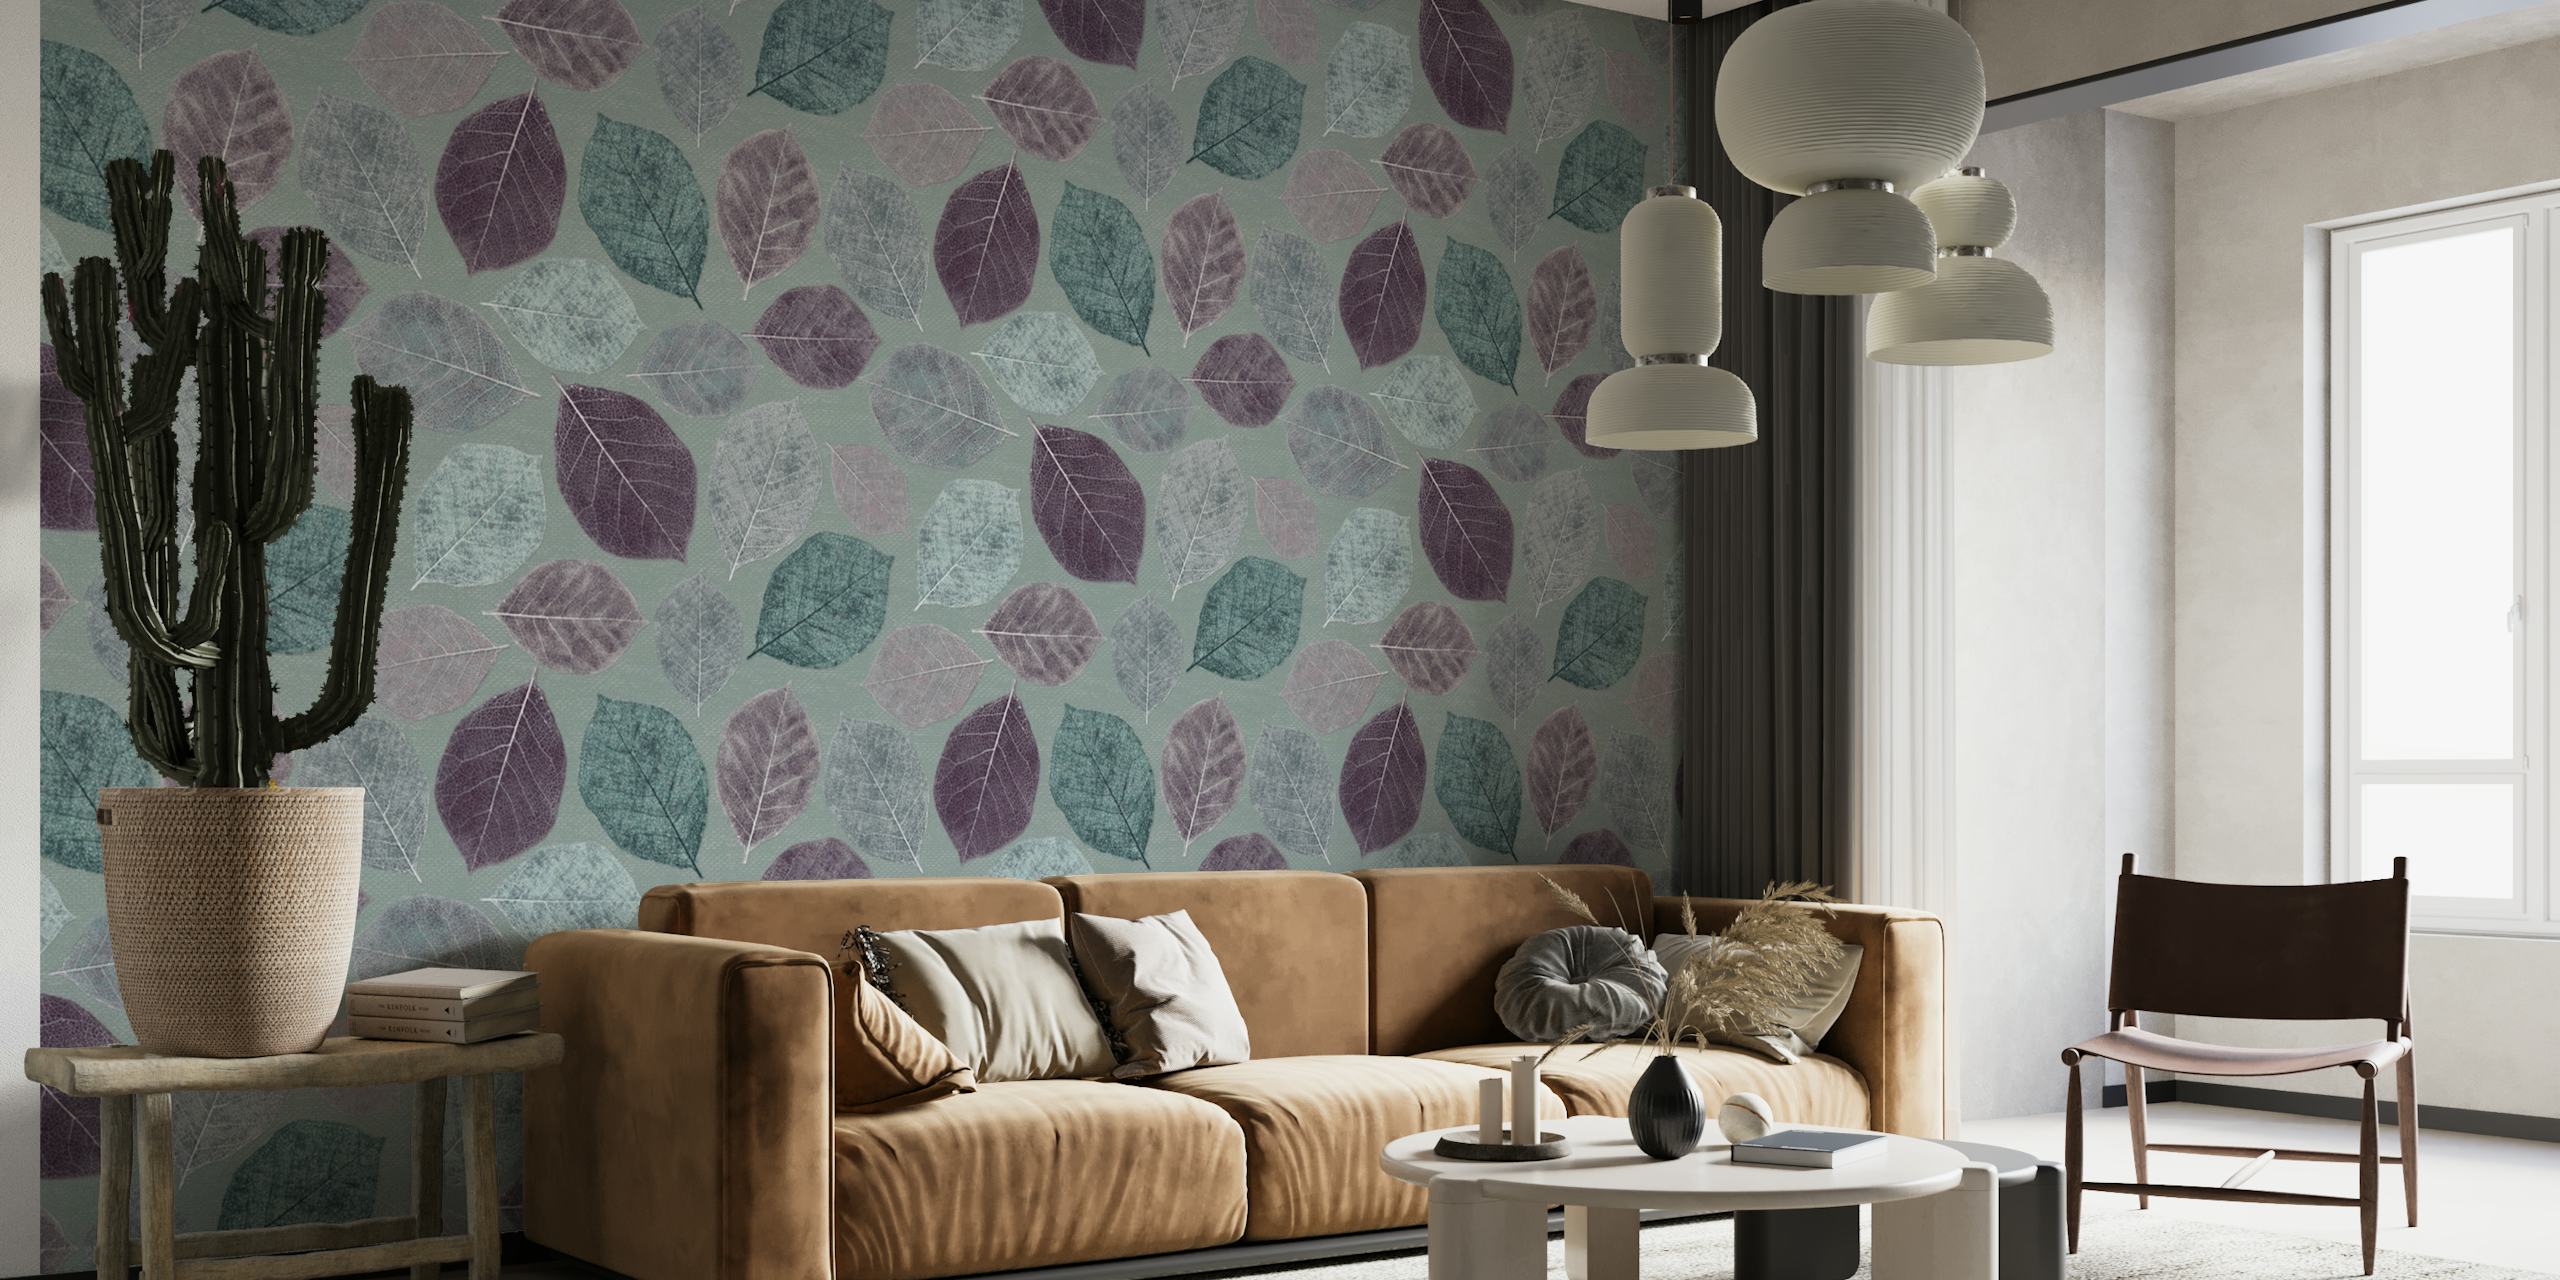 Magnolia Leaves Aqua Mauve Wall Mural with stylized botanical patterns in calming colors